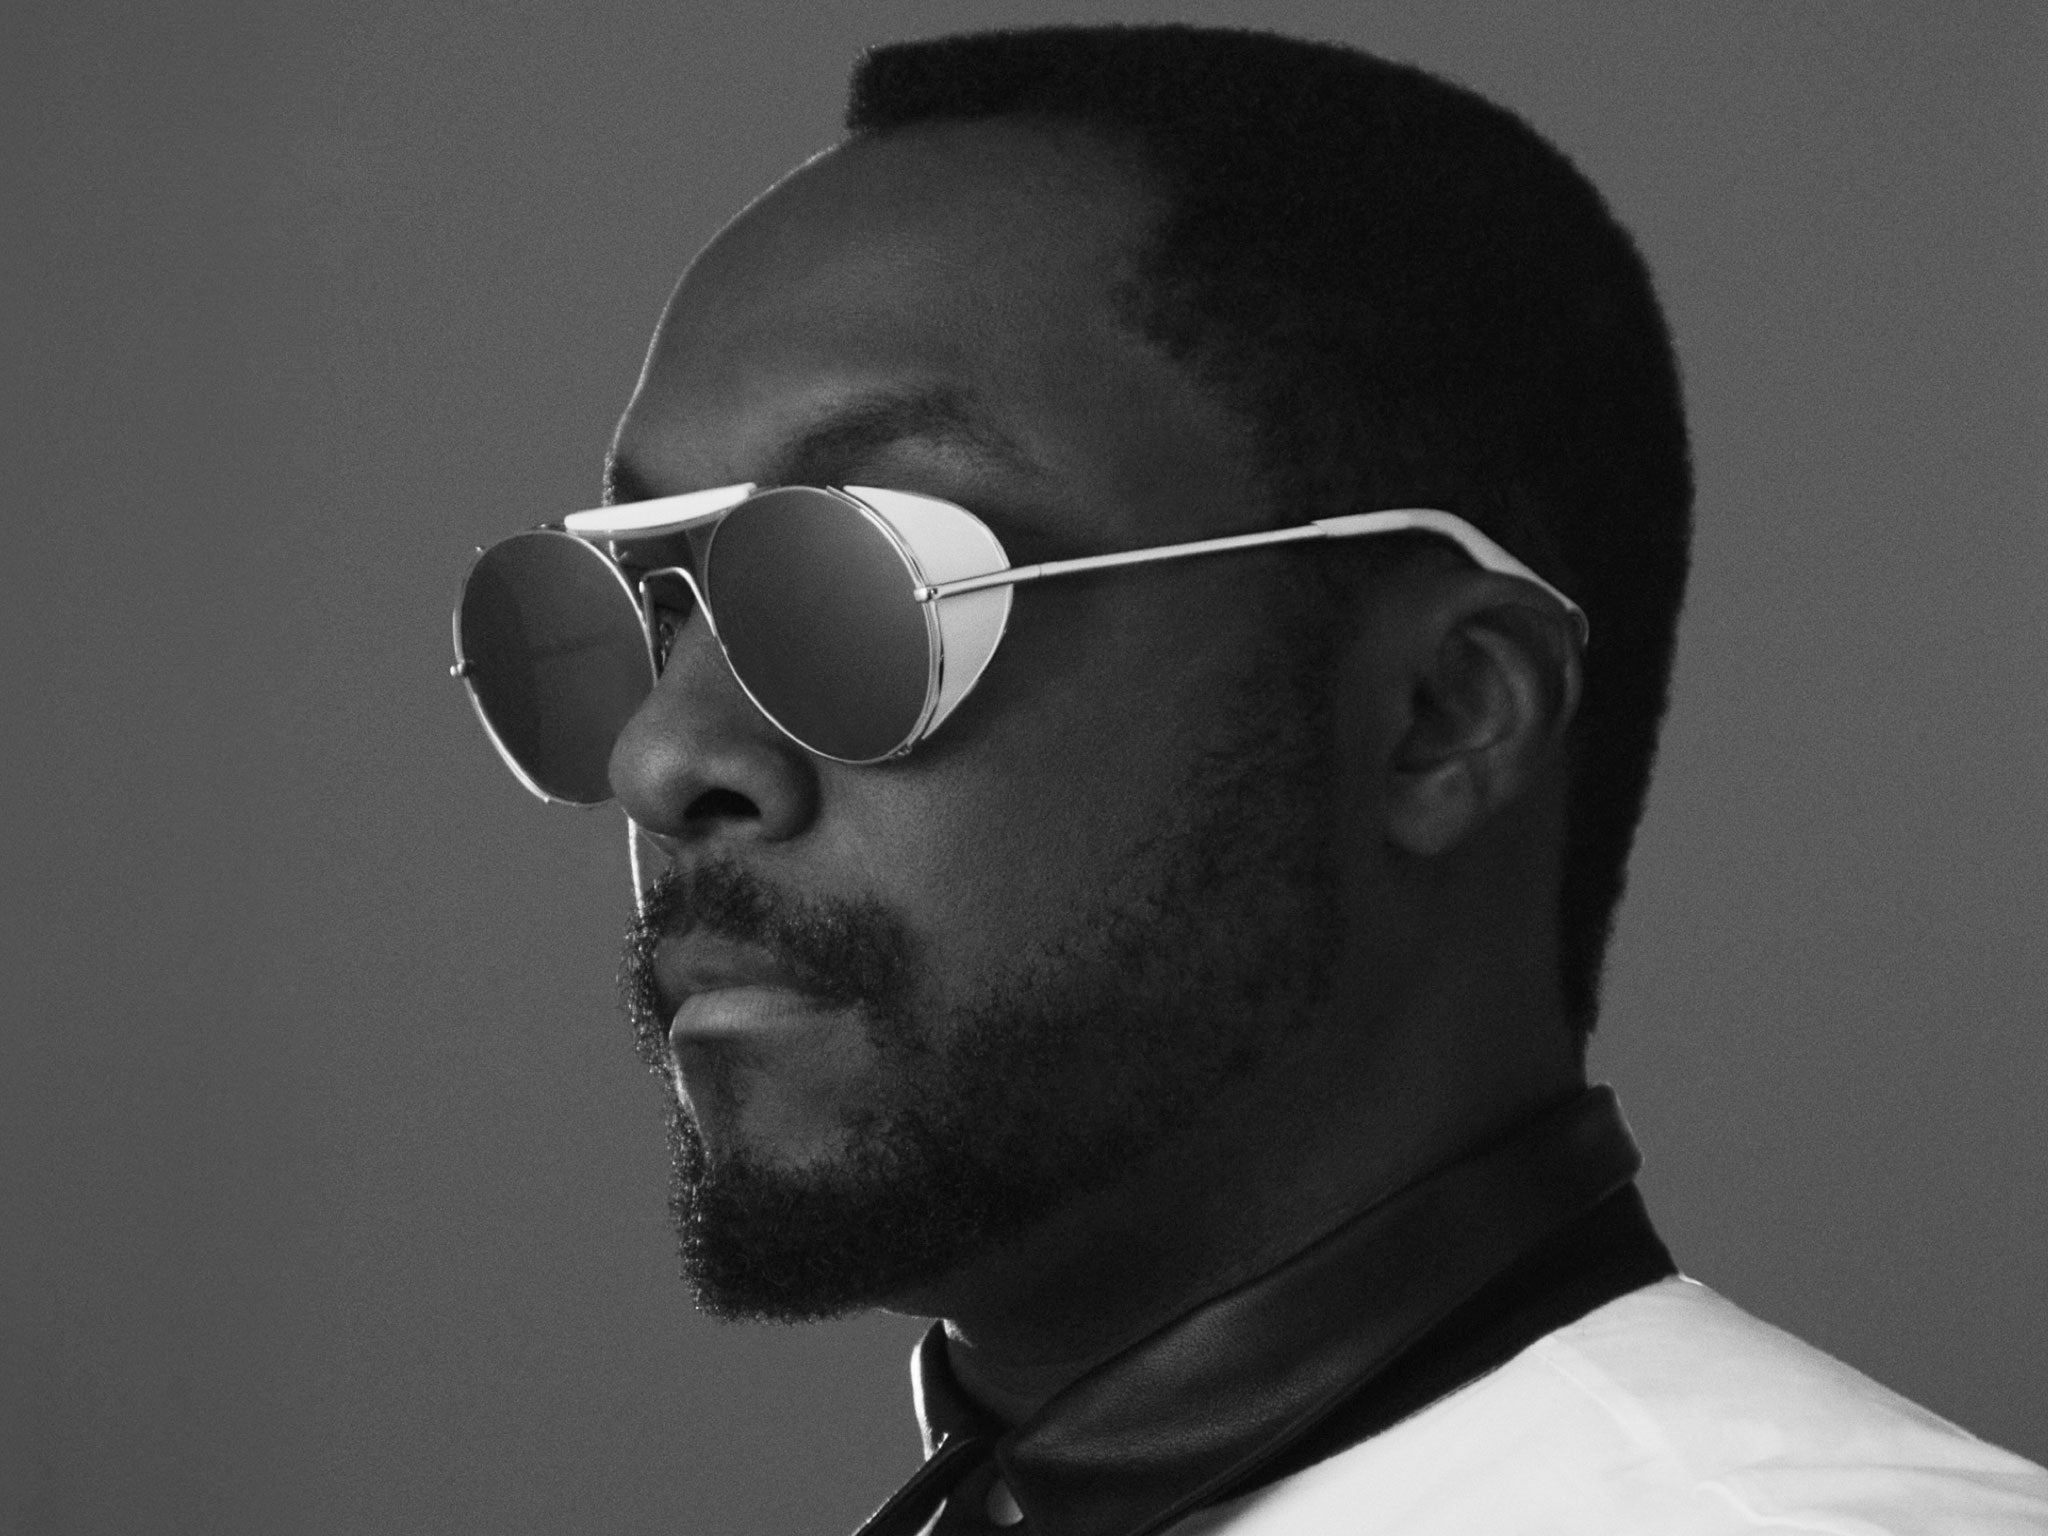 will.i.am poses for the campaign of his latest venture, eyewear label ill.i Optics